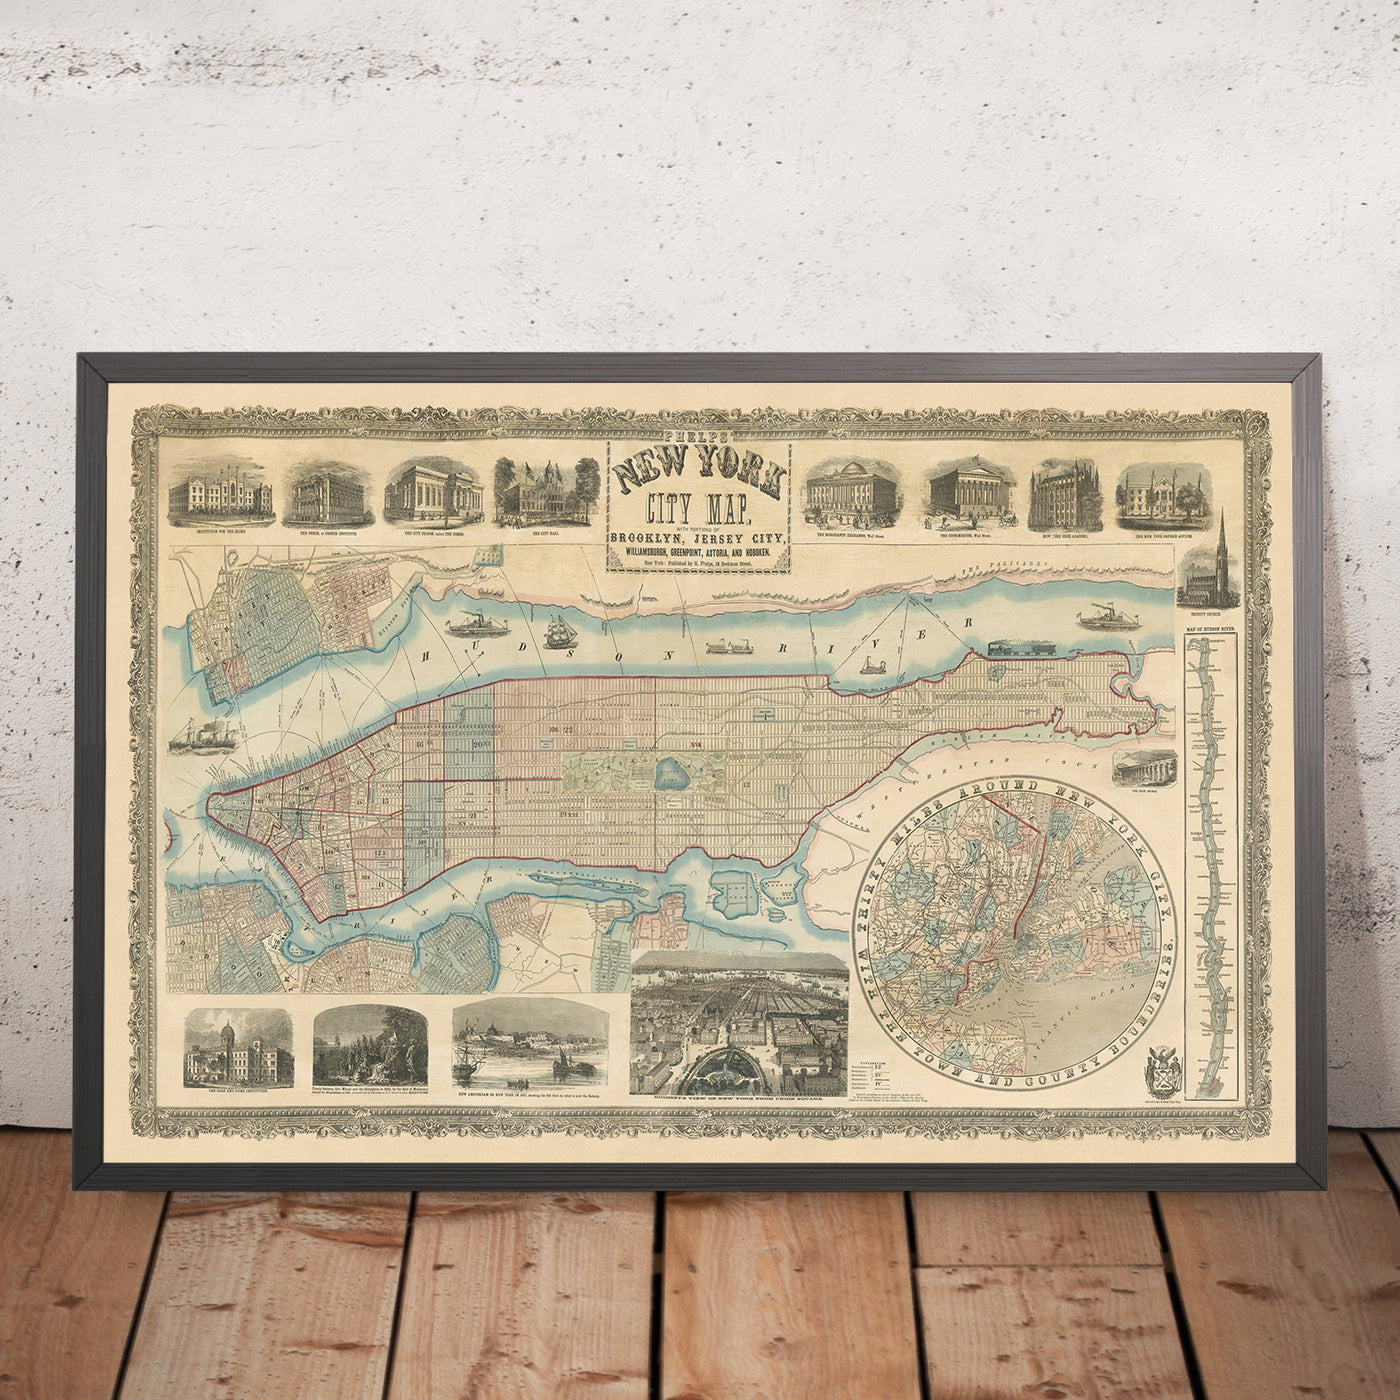 Rare Old Large Map of New York City by Phelps, 1857: Central Park, Hudson River, Old Illustrations